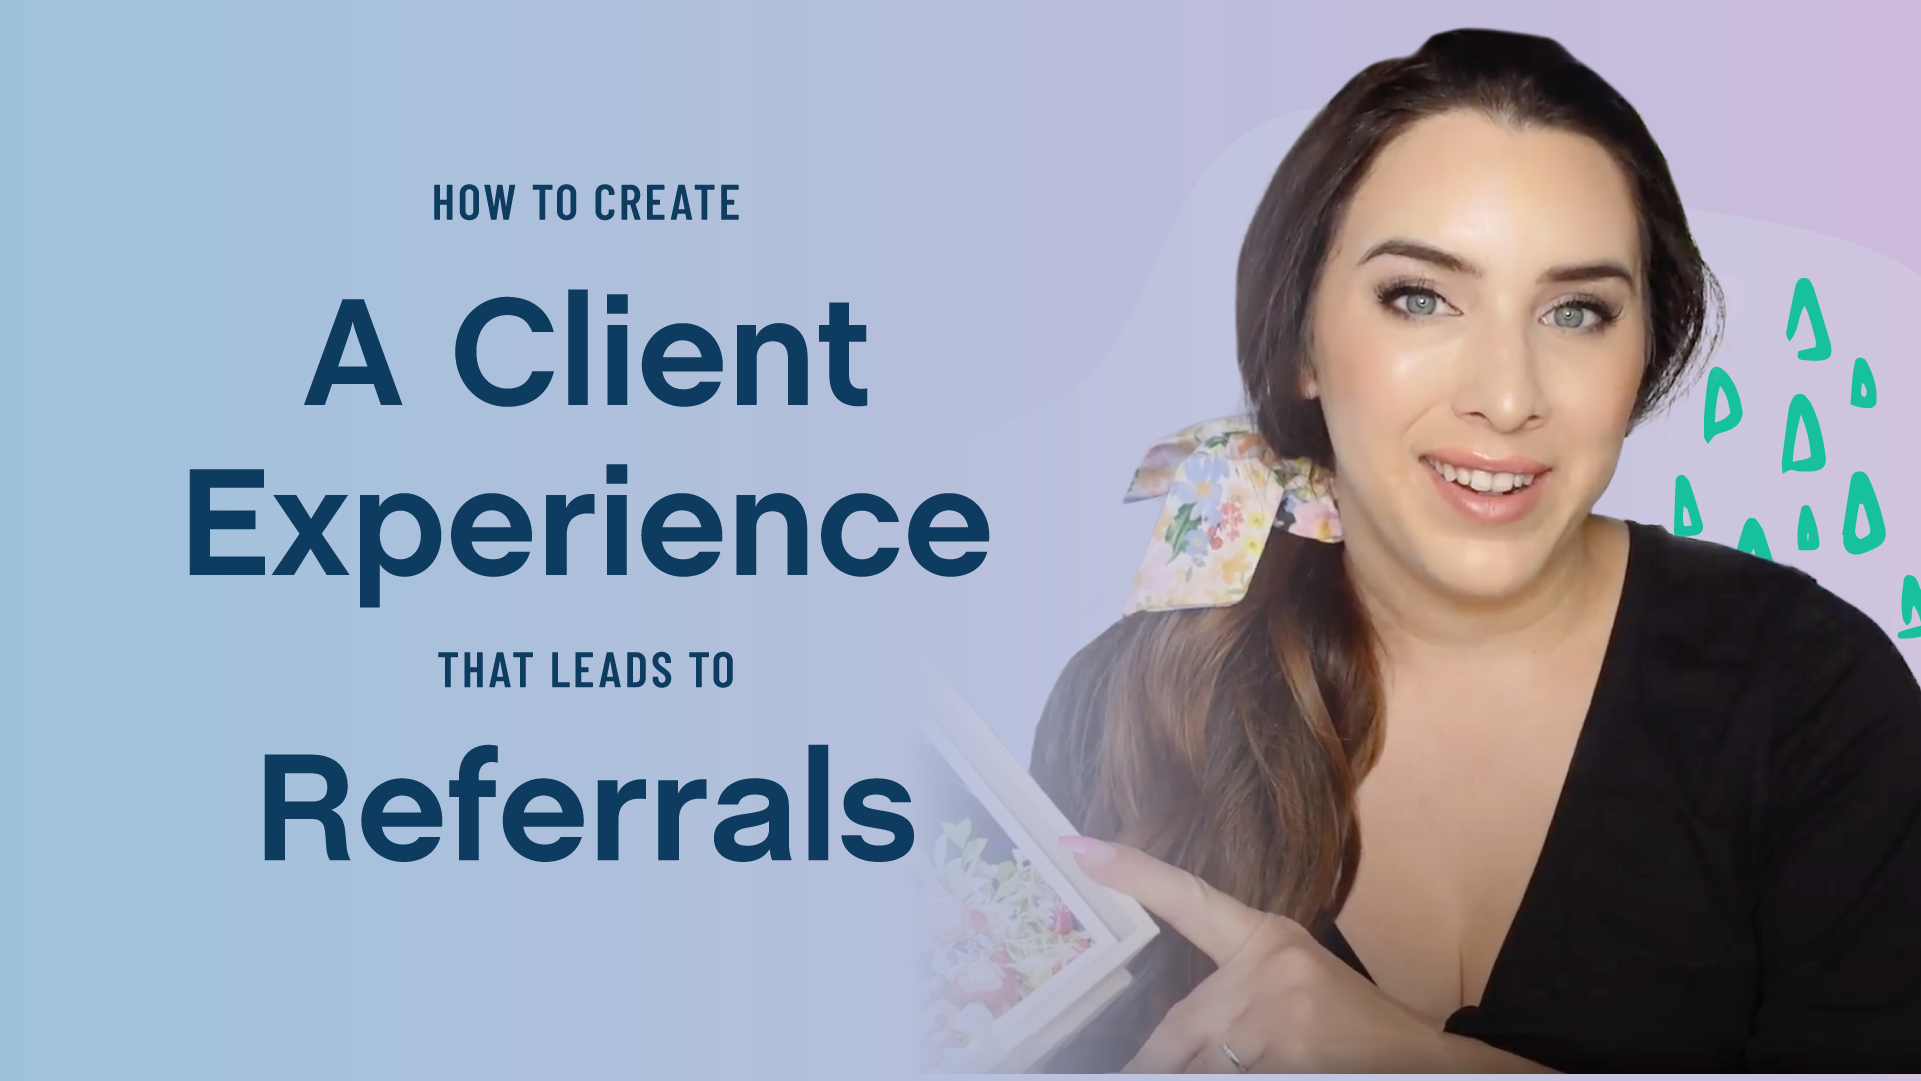 How to Create a Client Experience that Leads to Referrals